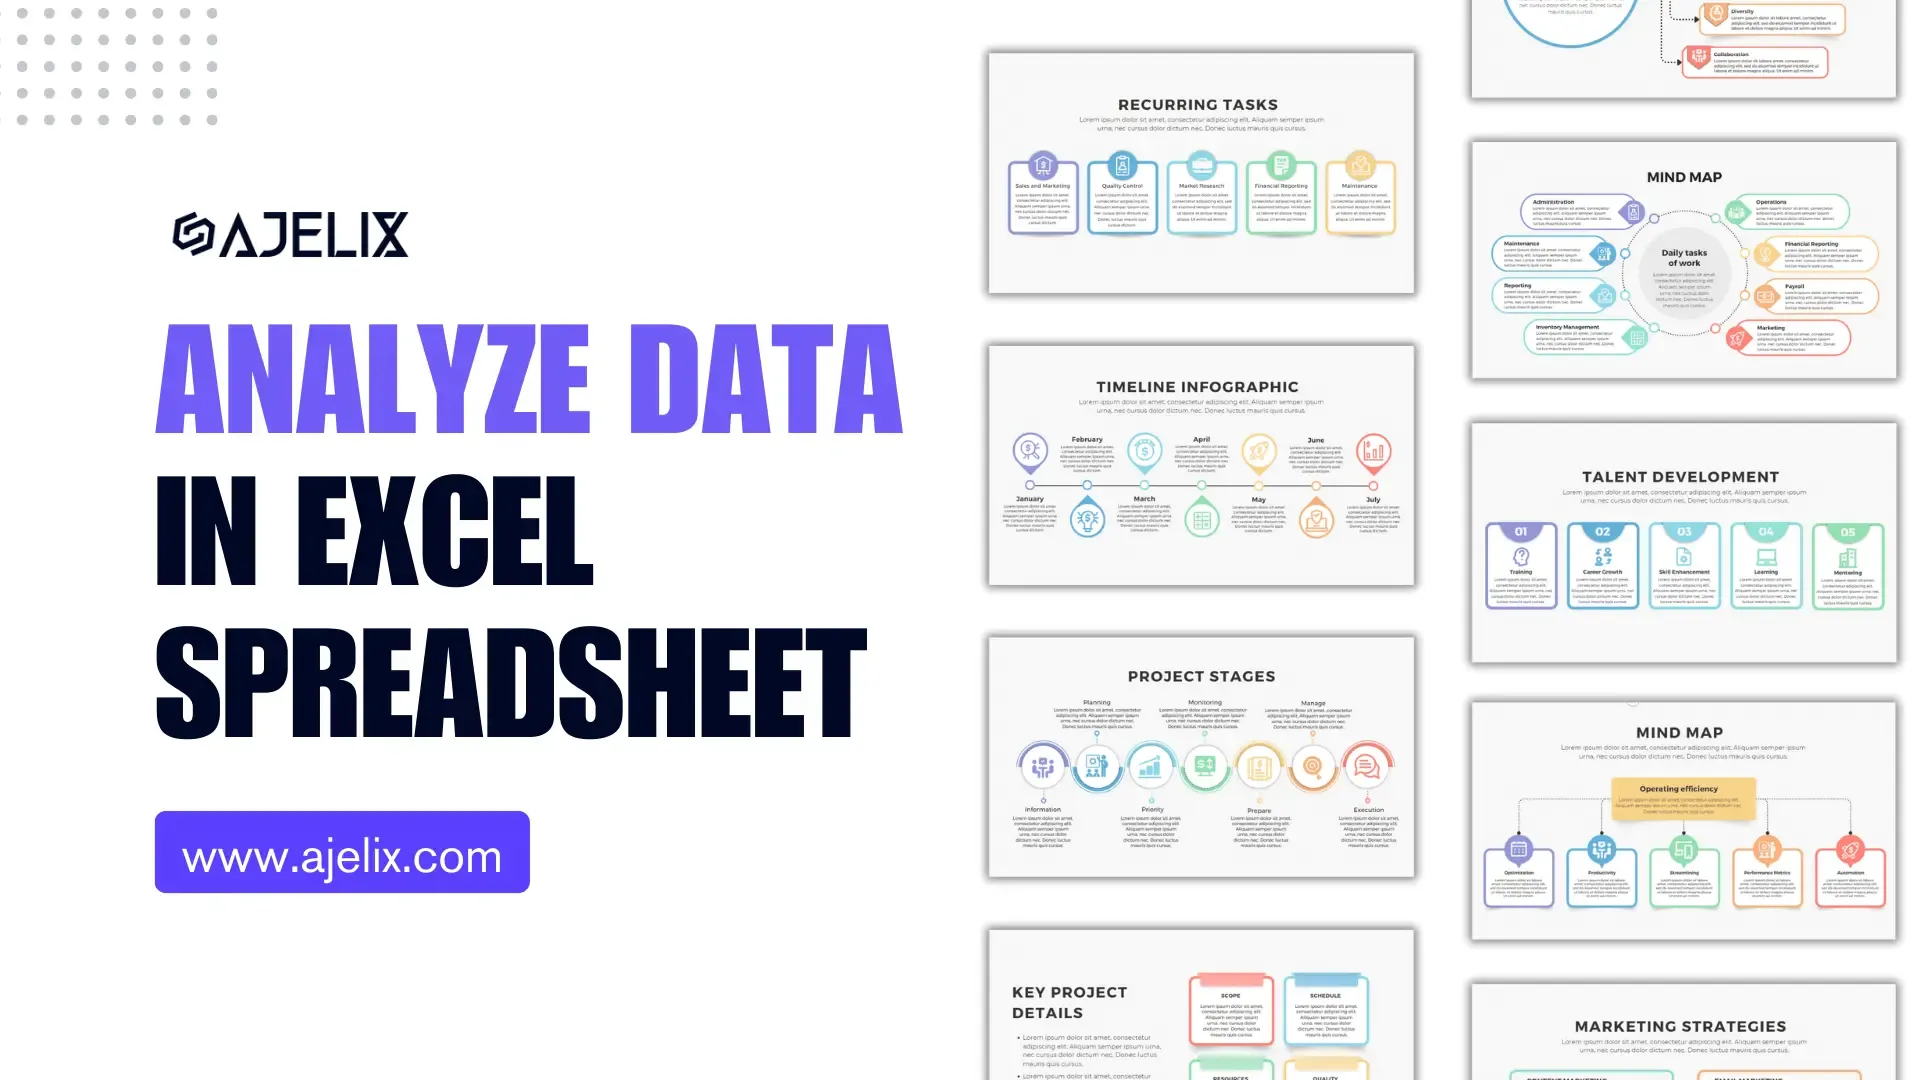 How to analyze data in Excel spreadsheet banner by author